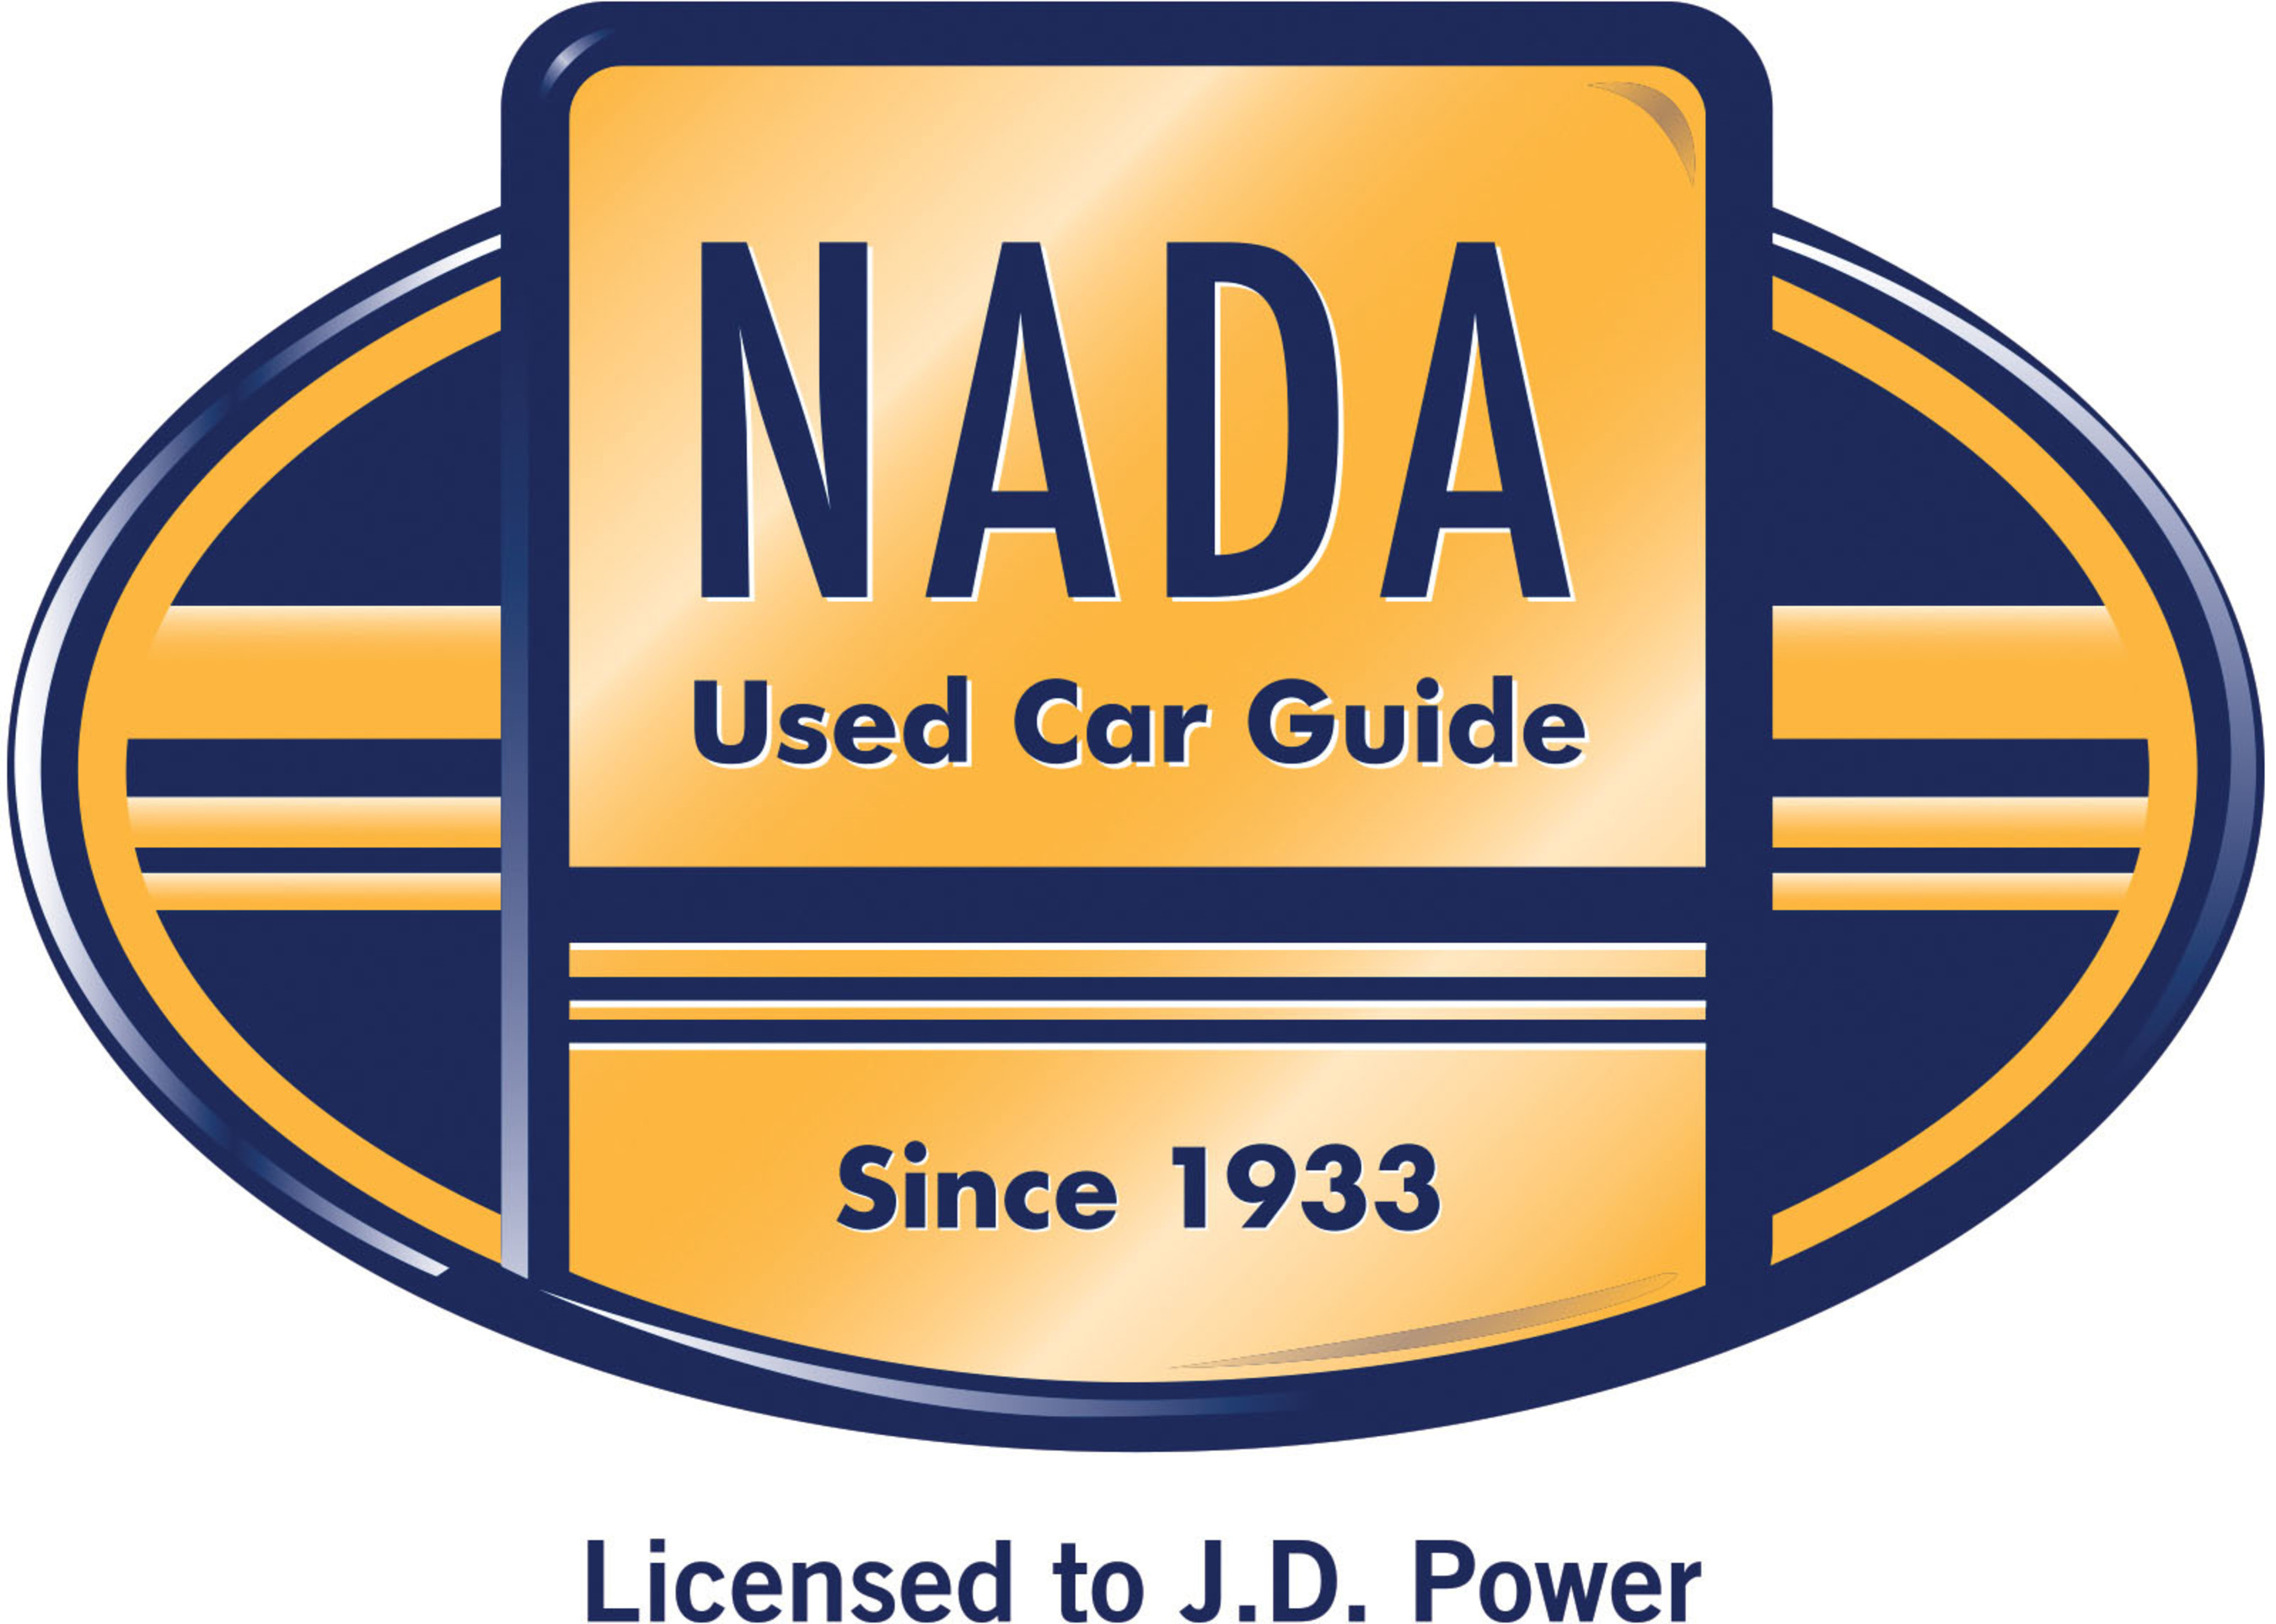 NADA Used Car Guide(R) and its logo are registered trademarks of National Automobile Dealers Association, used under license by J.D. Power and Associates. (PRNewsFoto/NADA Used Car Guide) (PRNewsFoto/NADA Used Car Guide)